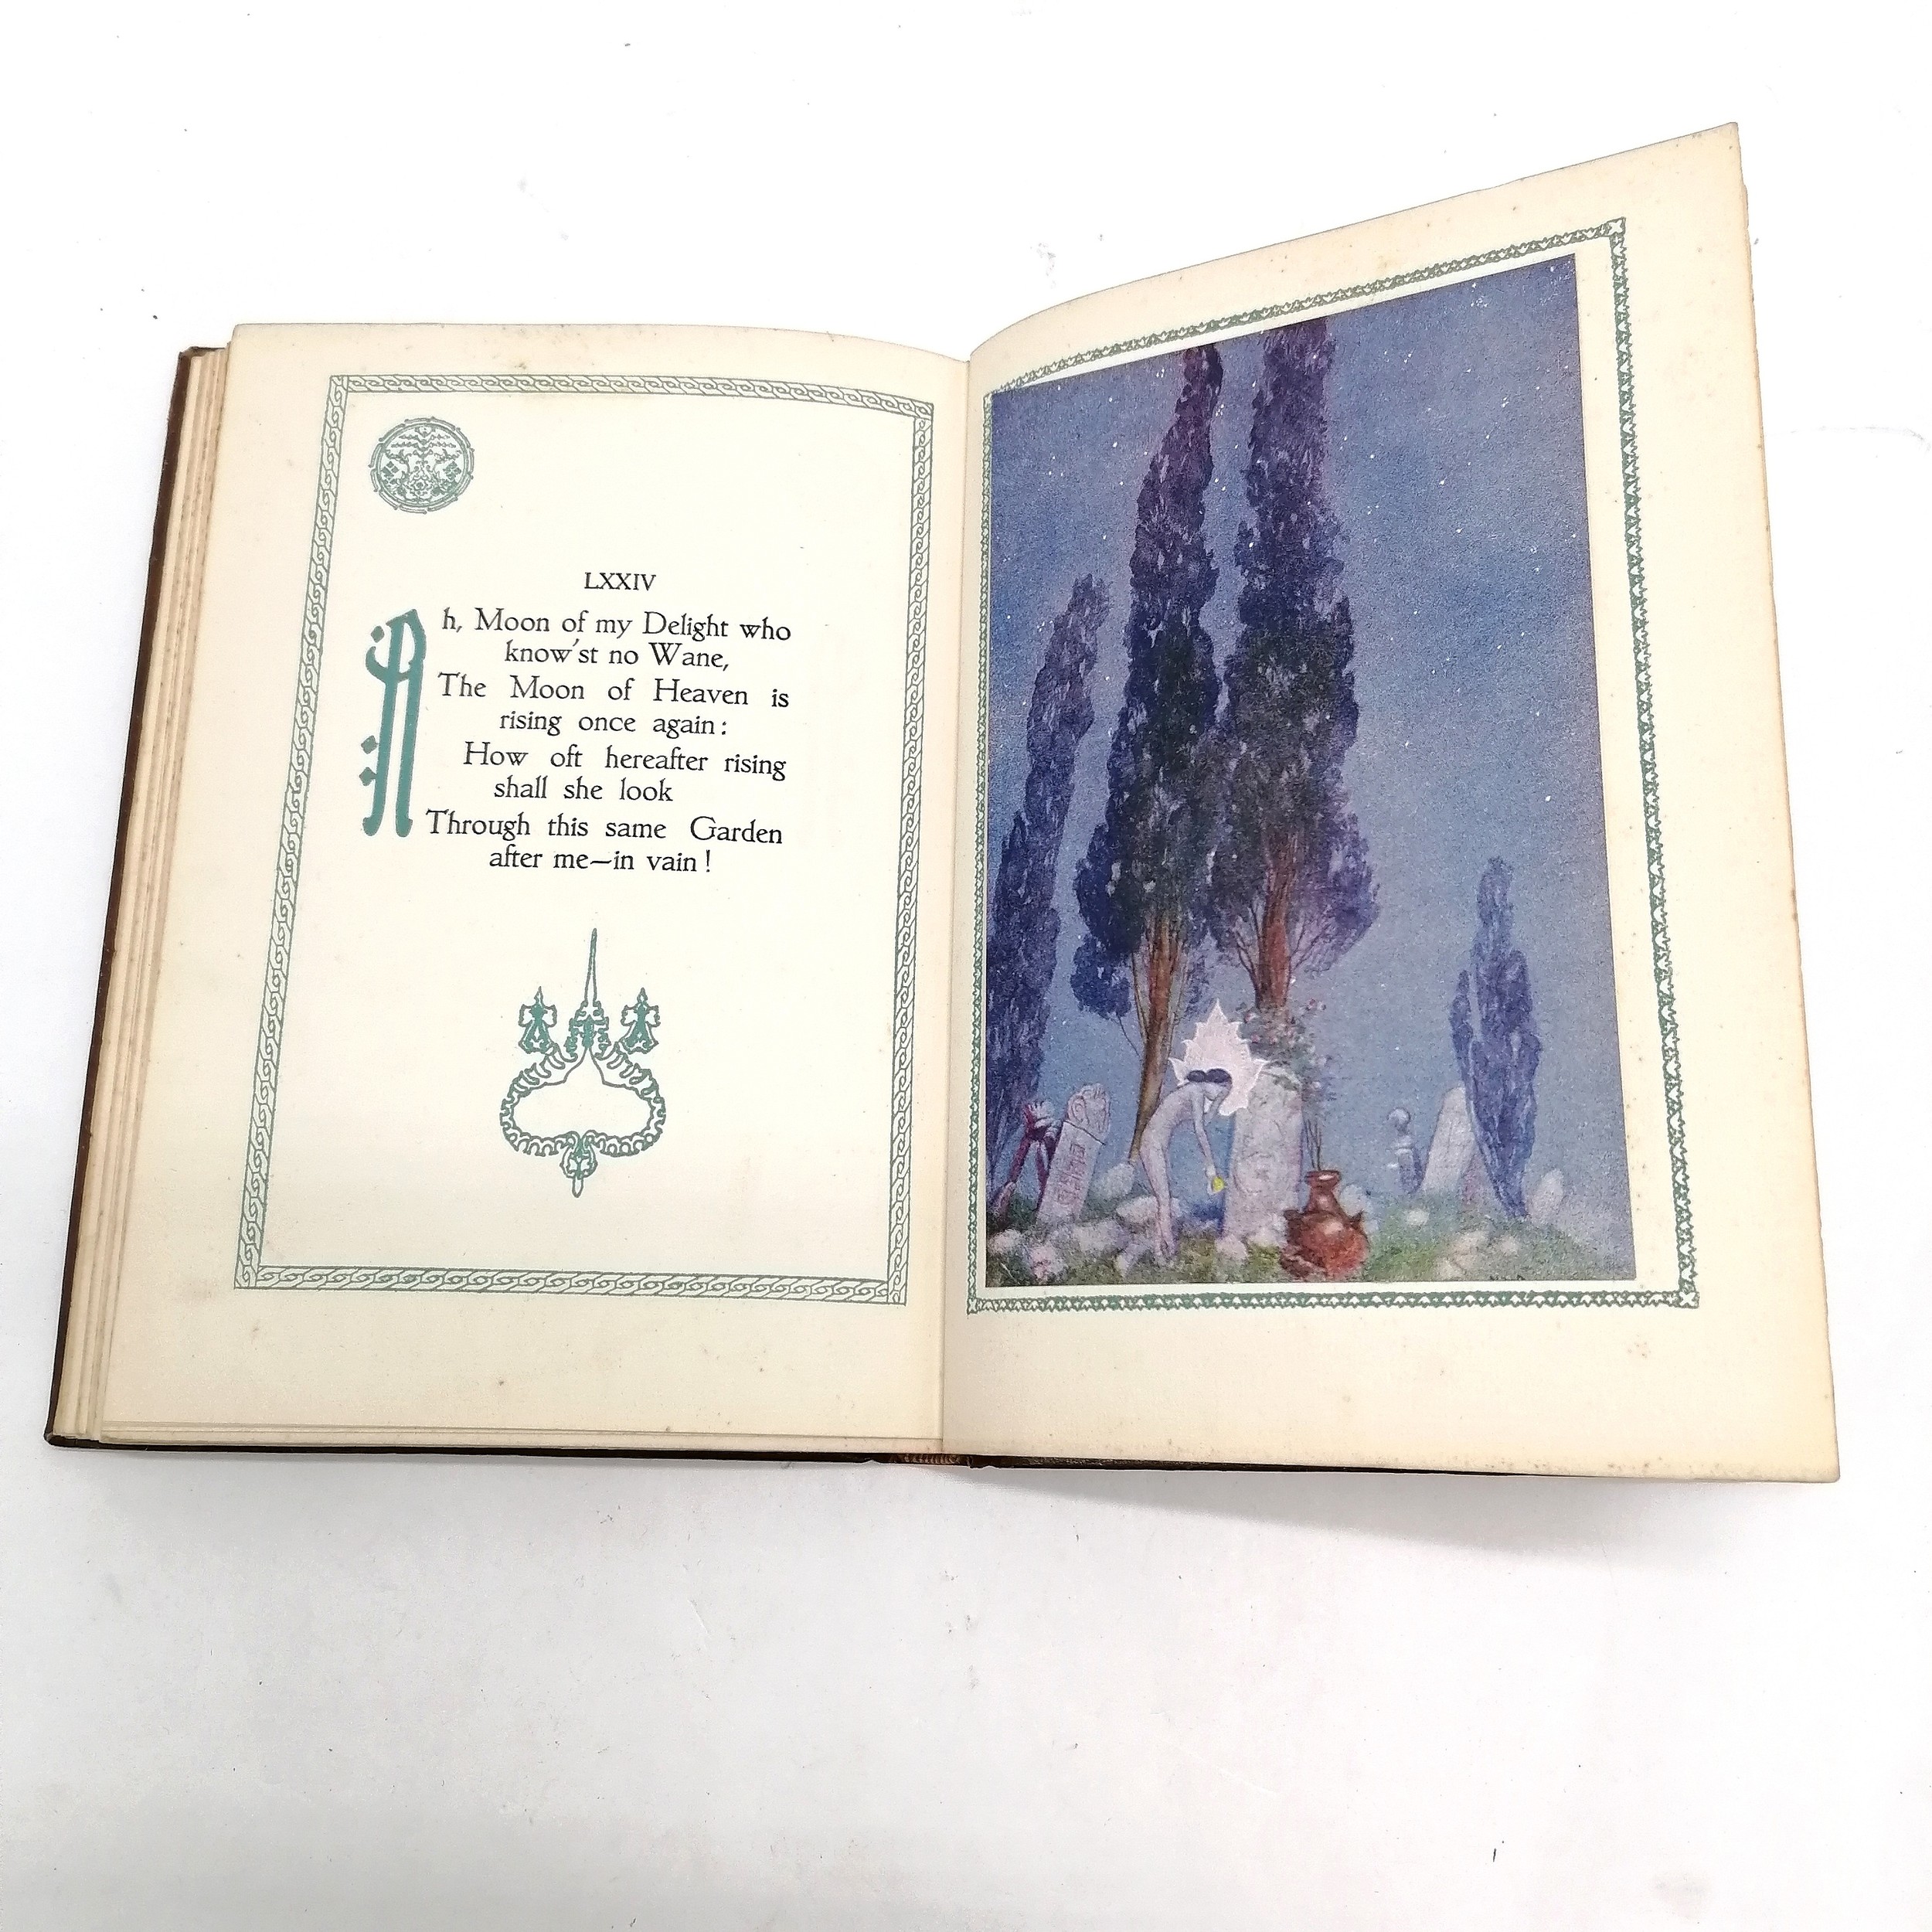 (1909+) Rubaiyat of Omar Khayyam (George Harrap) book with illustrations by William 'Willy' Andrew - Image 3 of 8